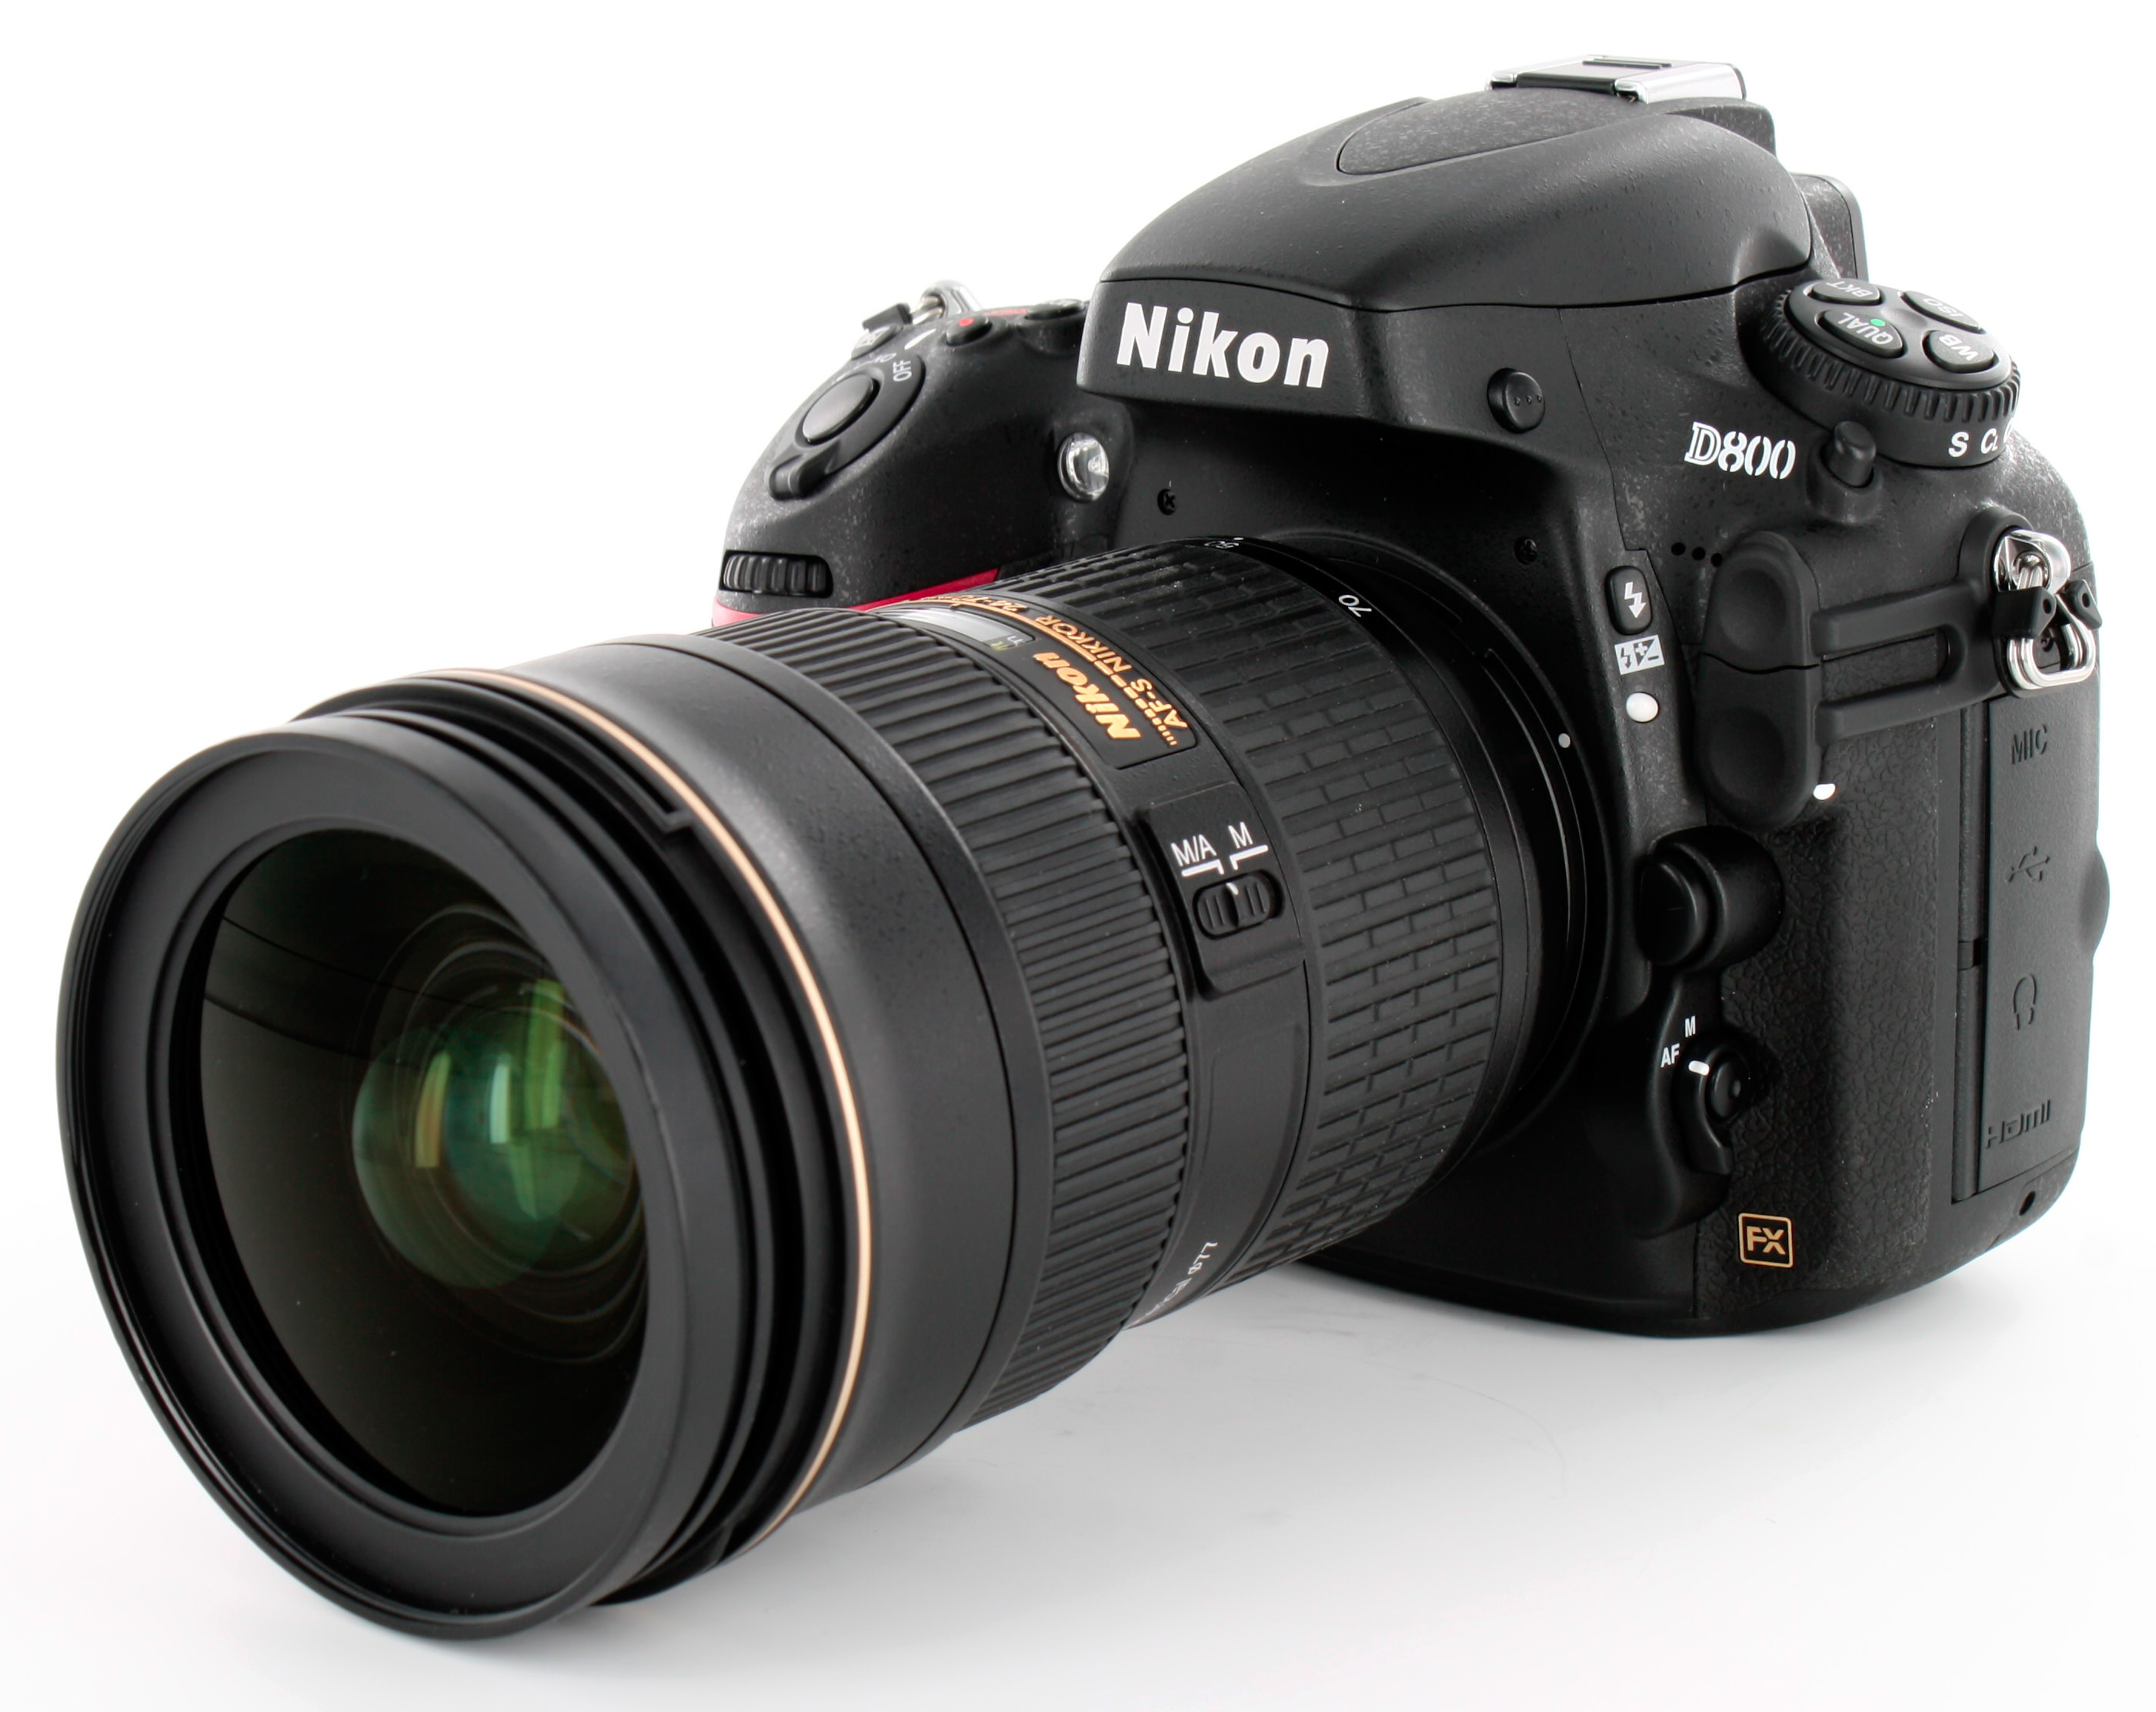 Nikon D800 - From A Canon Users Perspective.